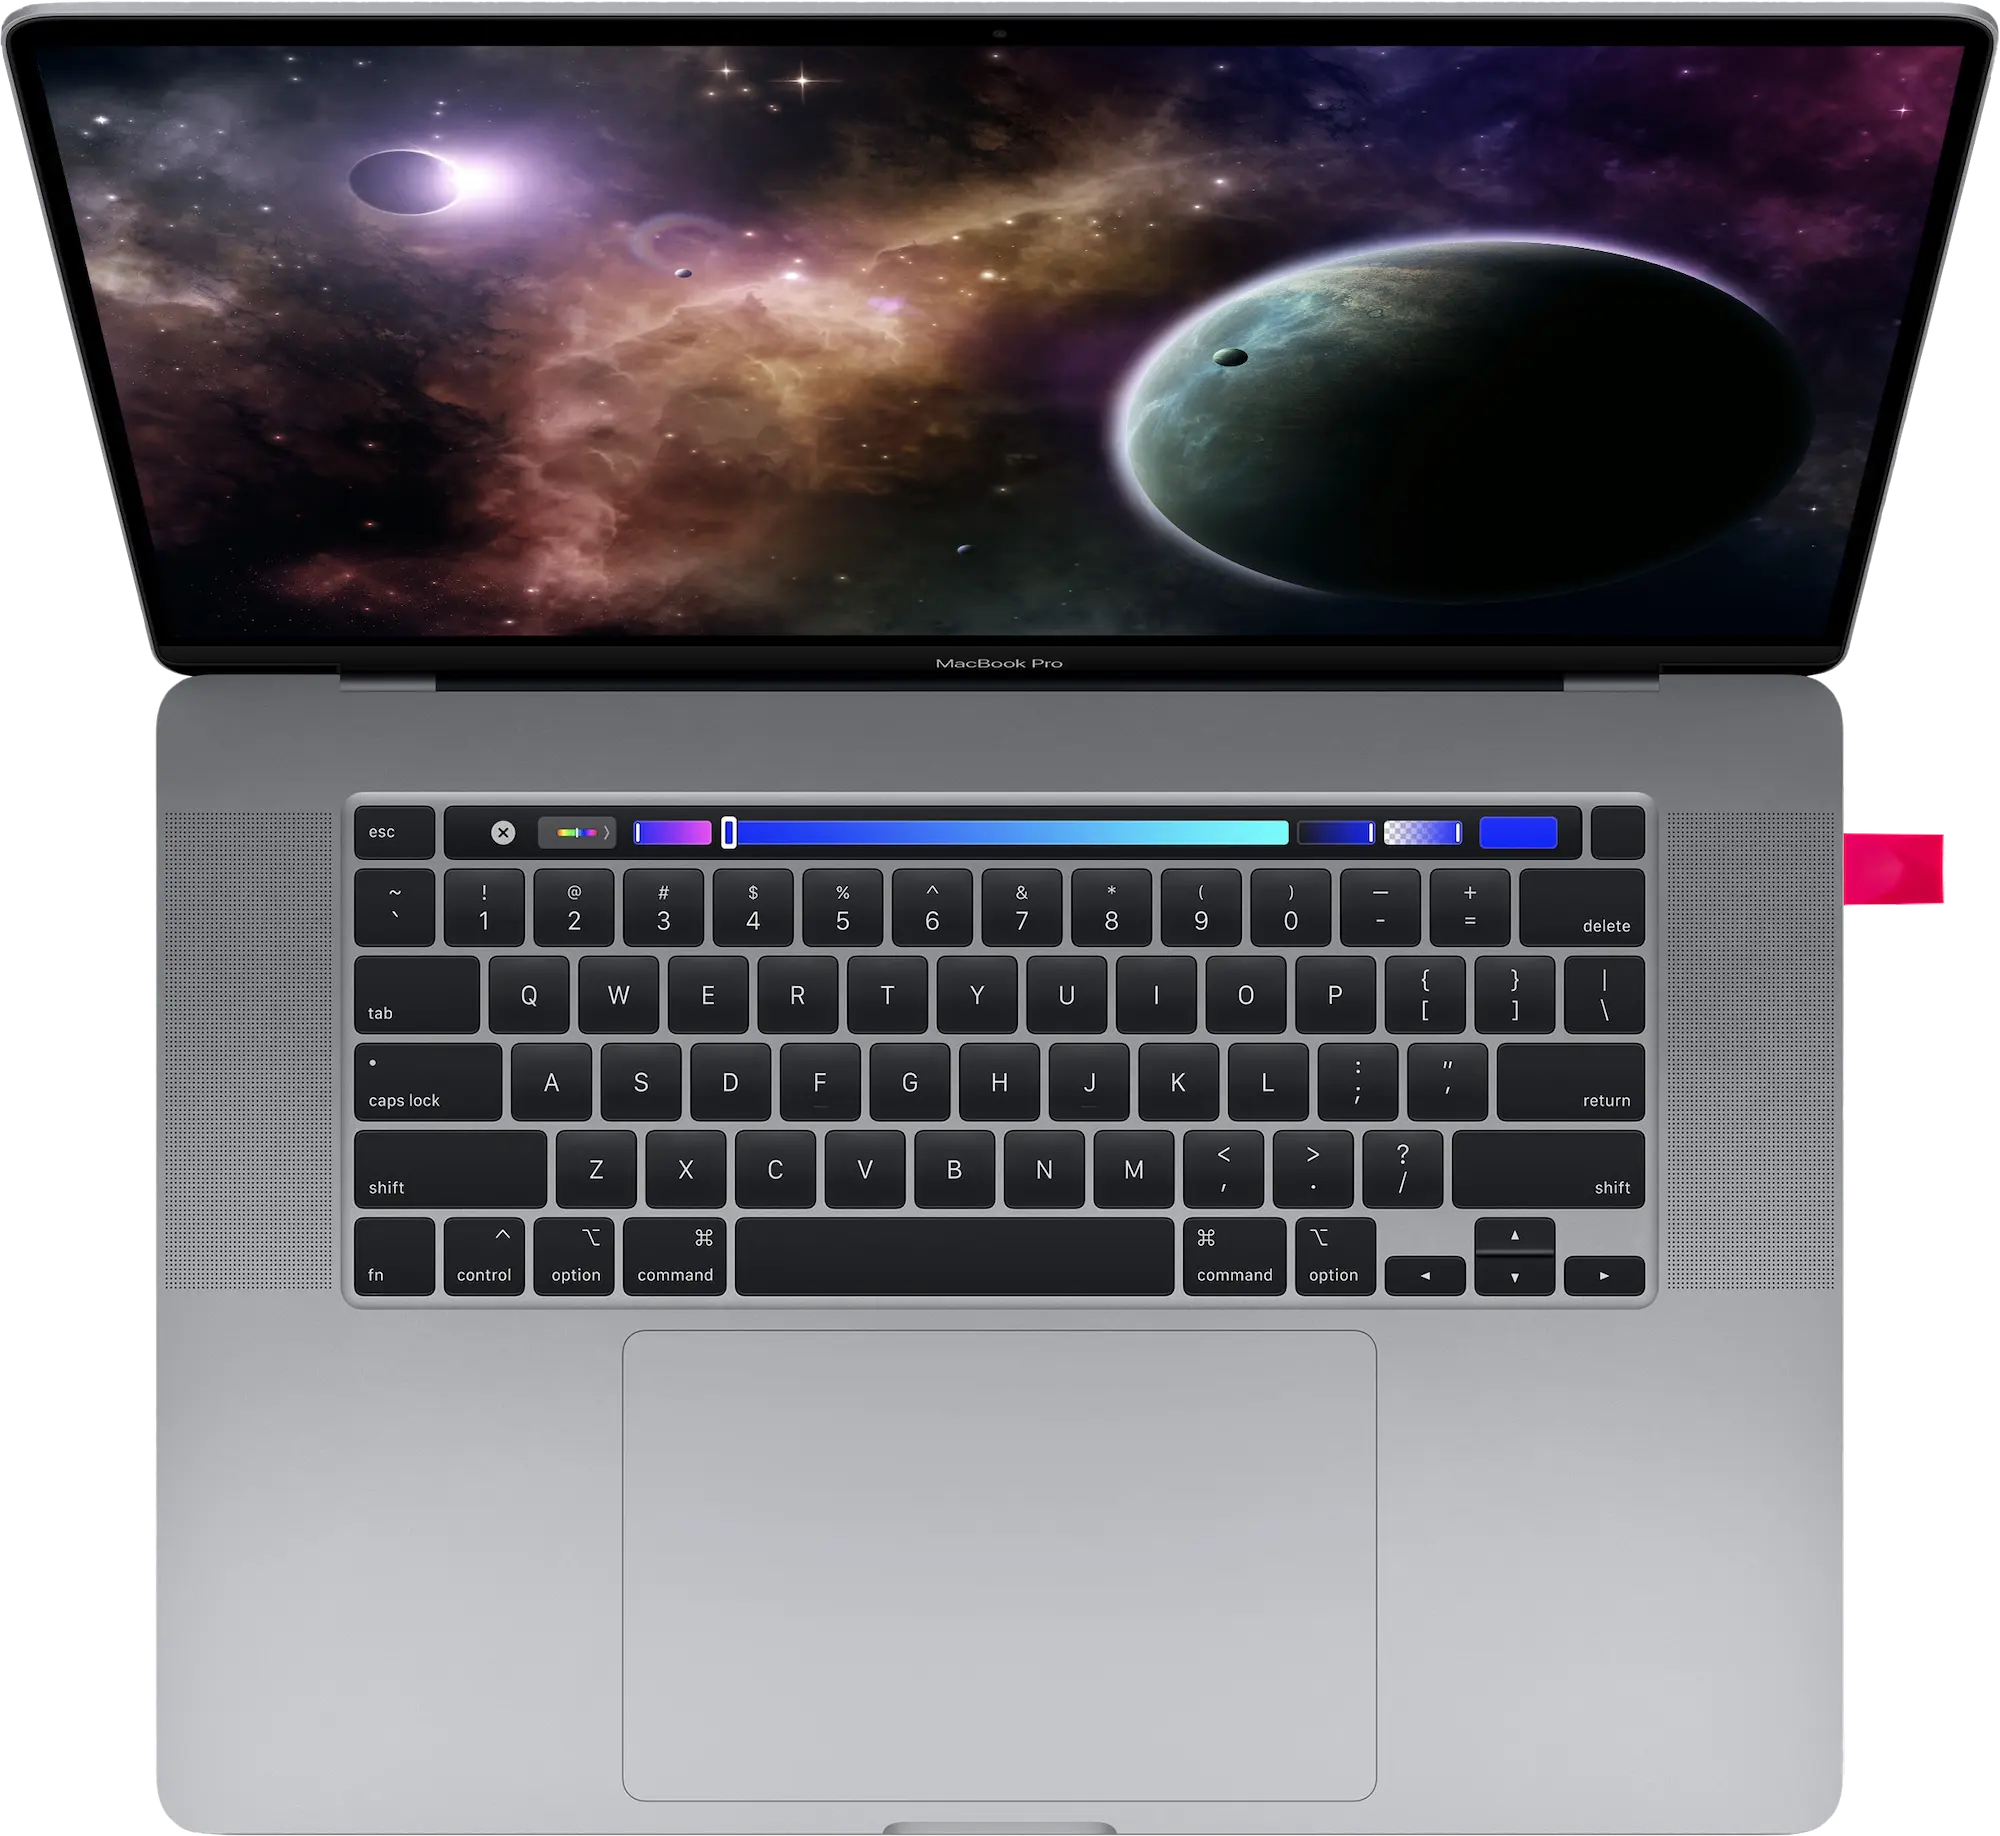 A Macbook shows an image of space with the red Luna hardware plugged in